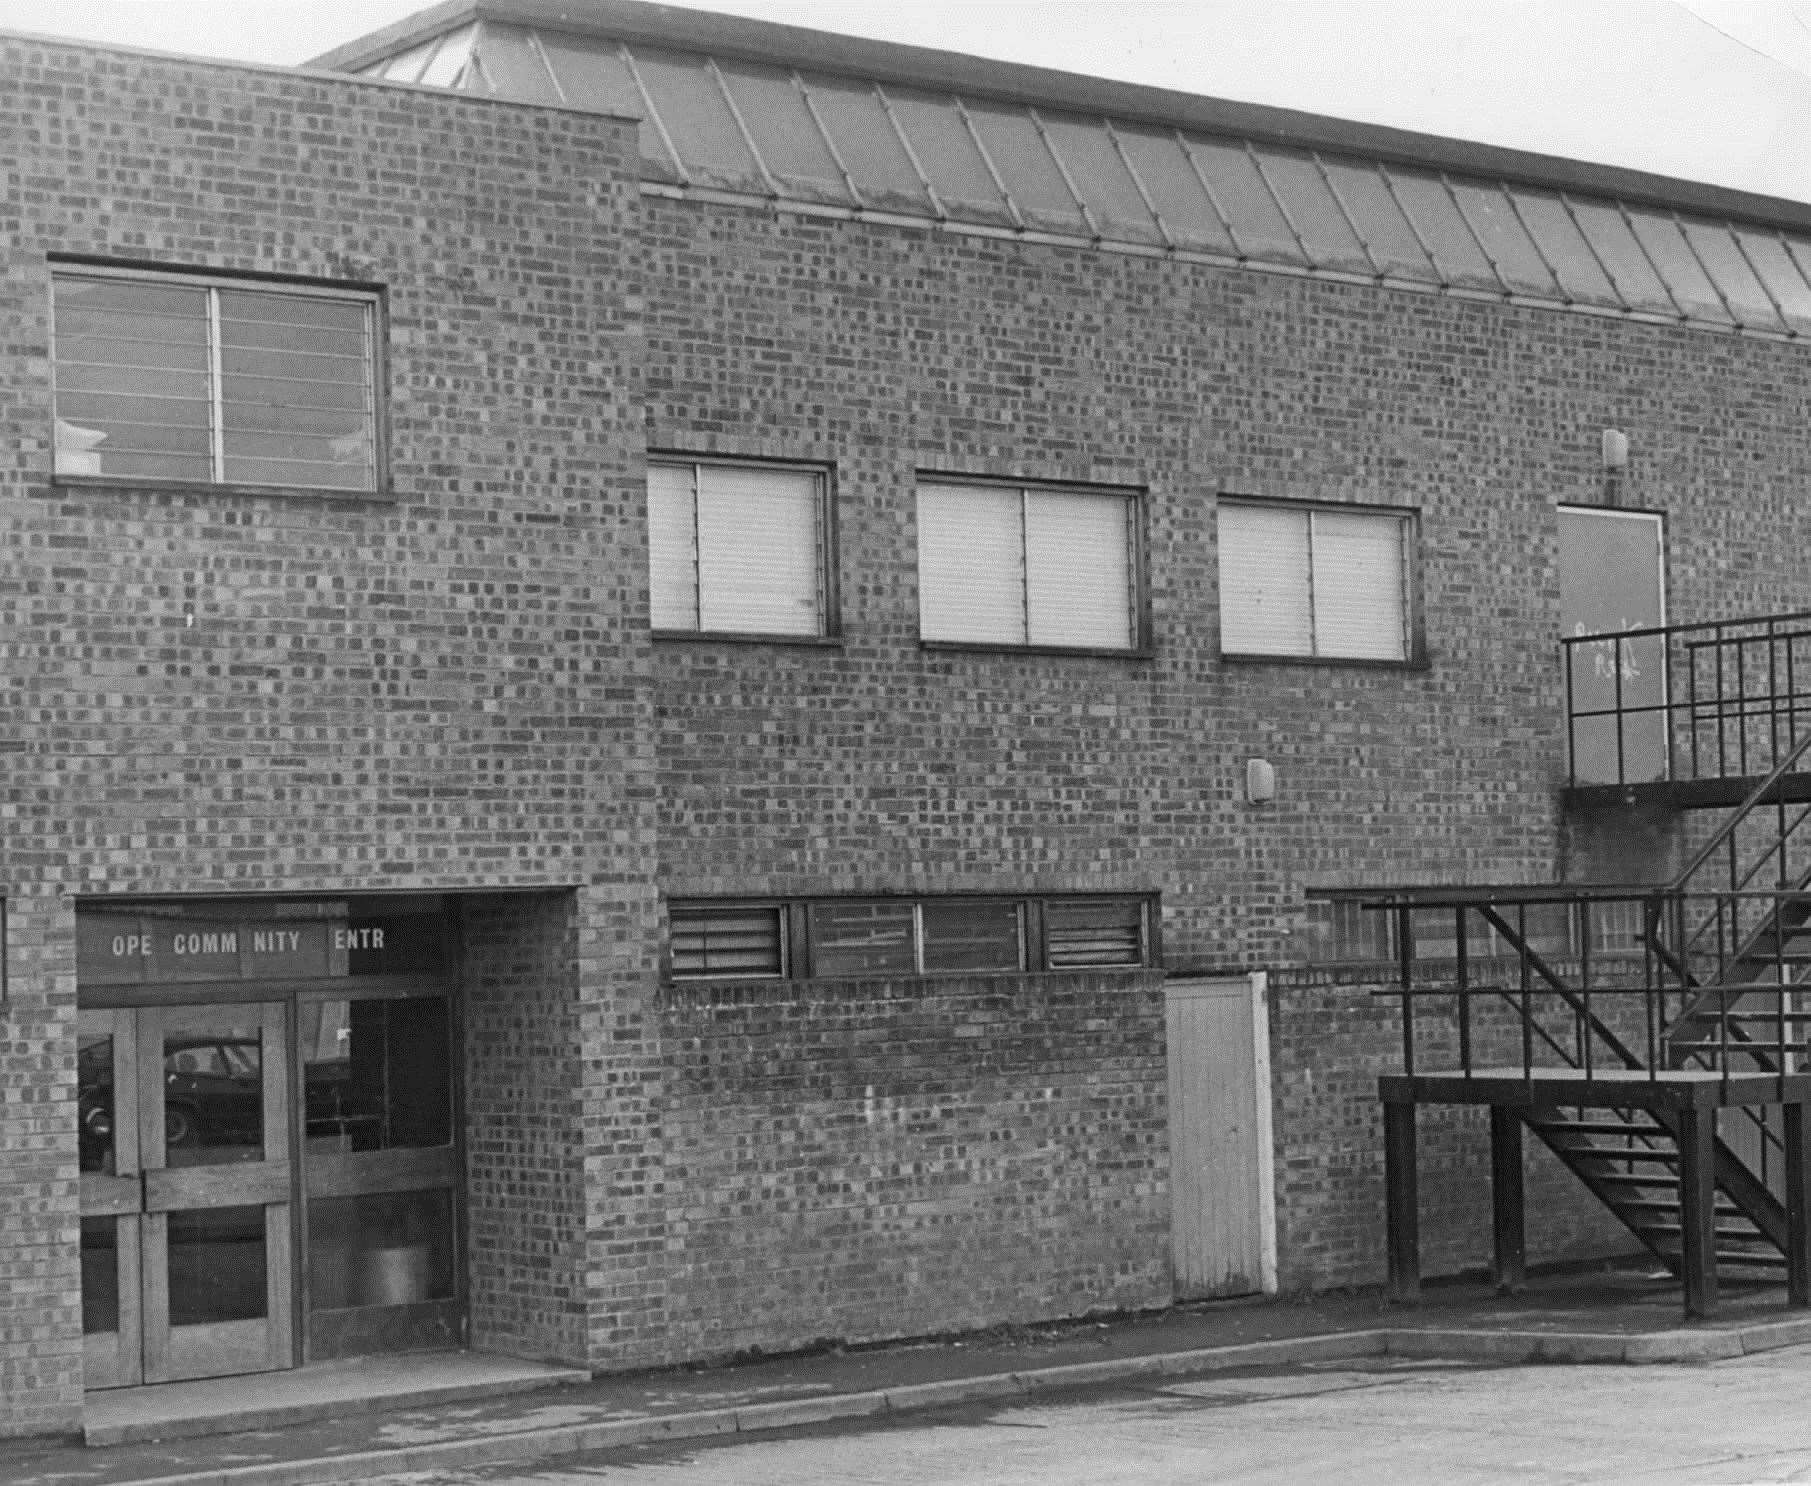 The old Stanhope Community Centre, pictured in February 1981